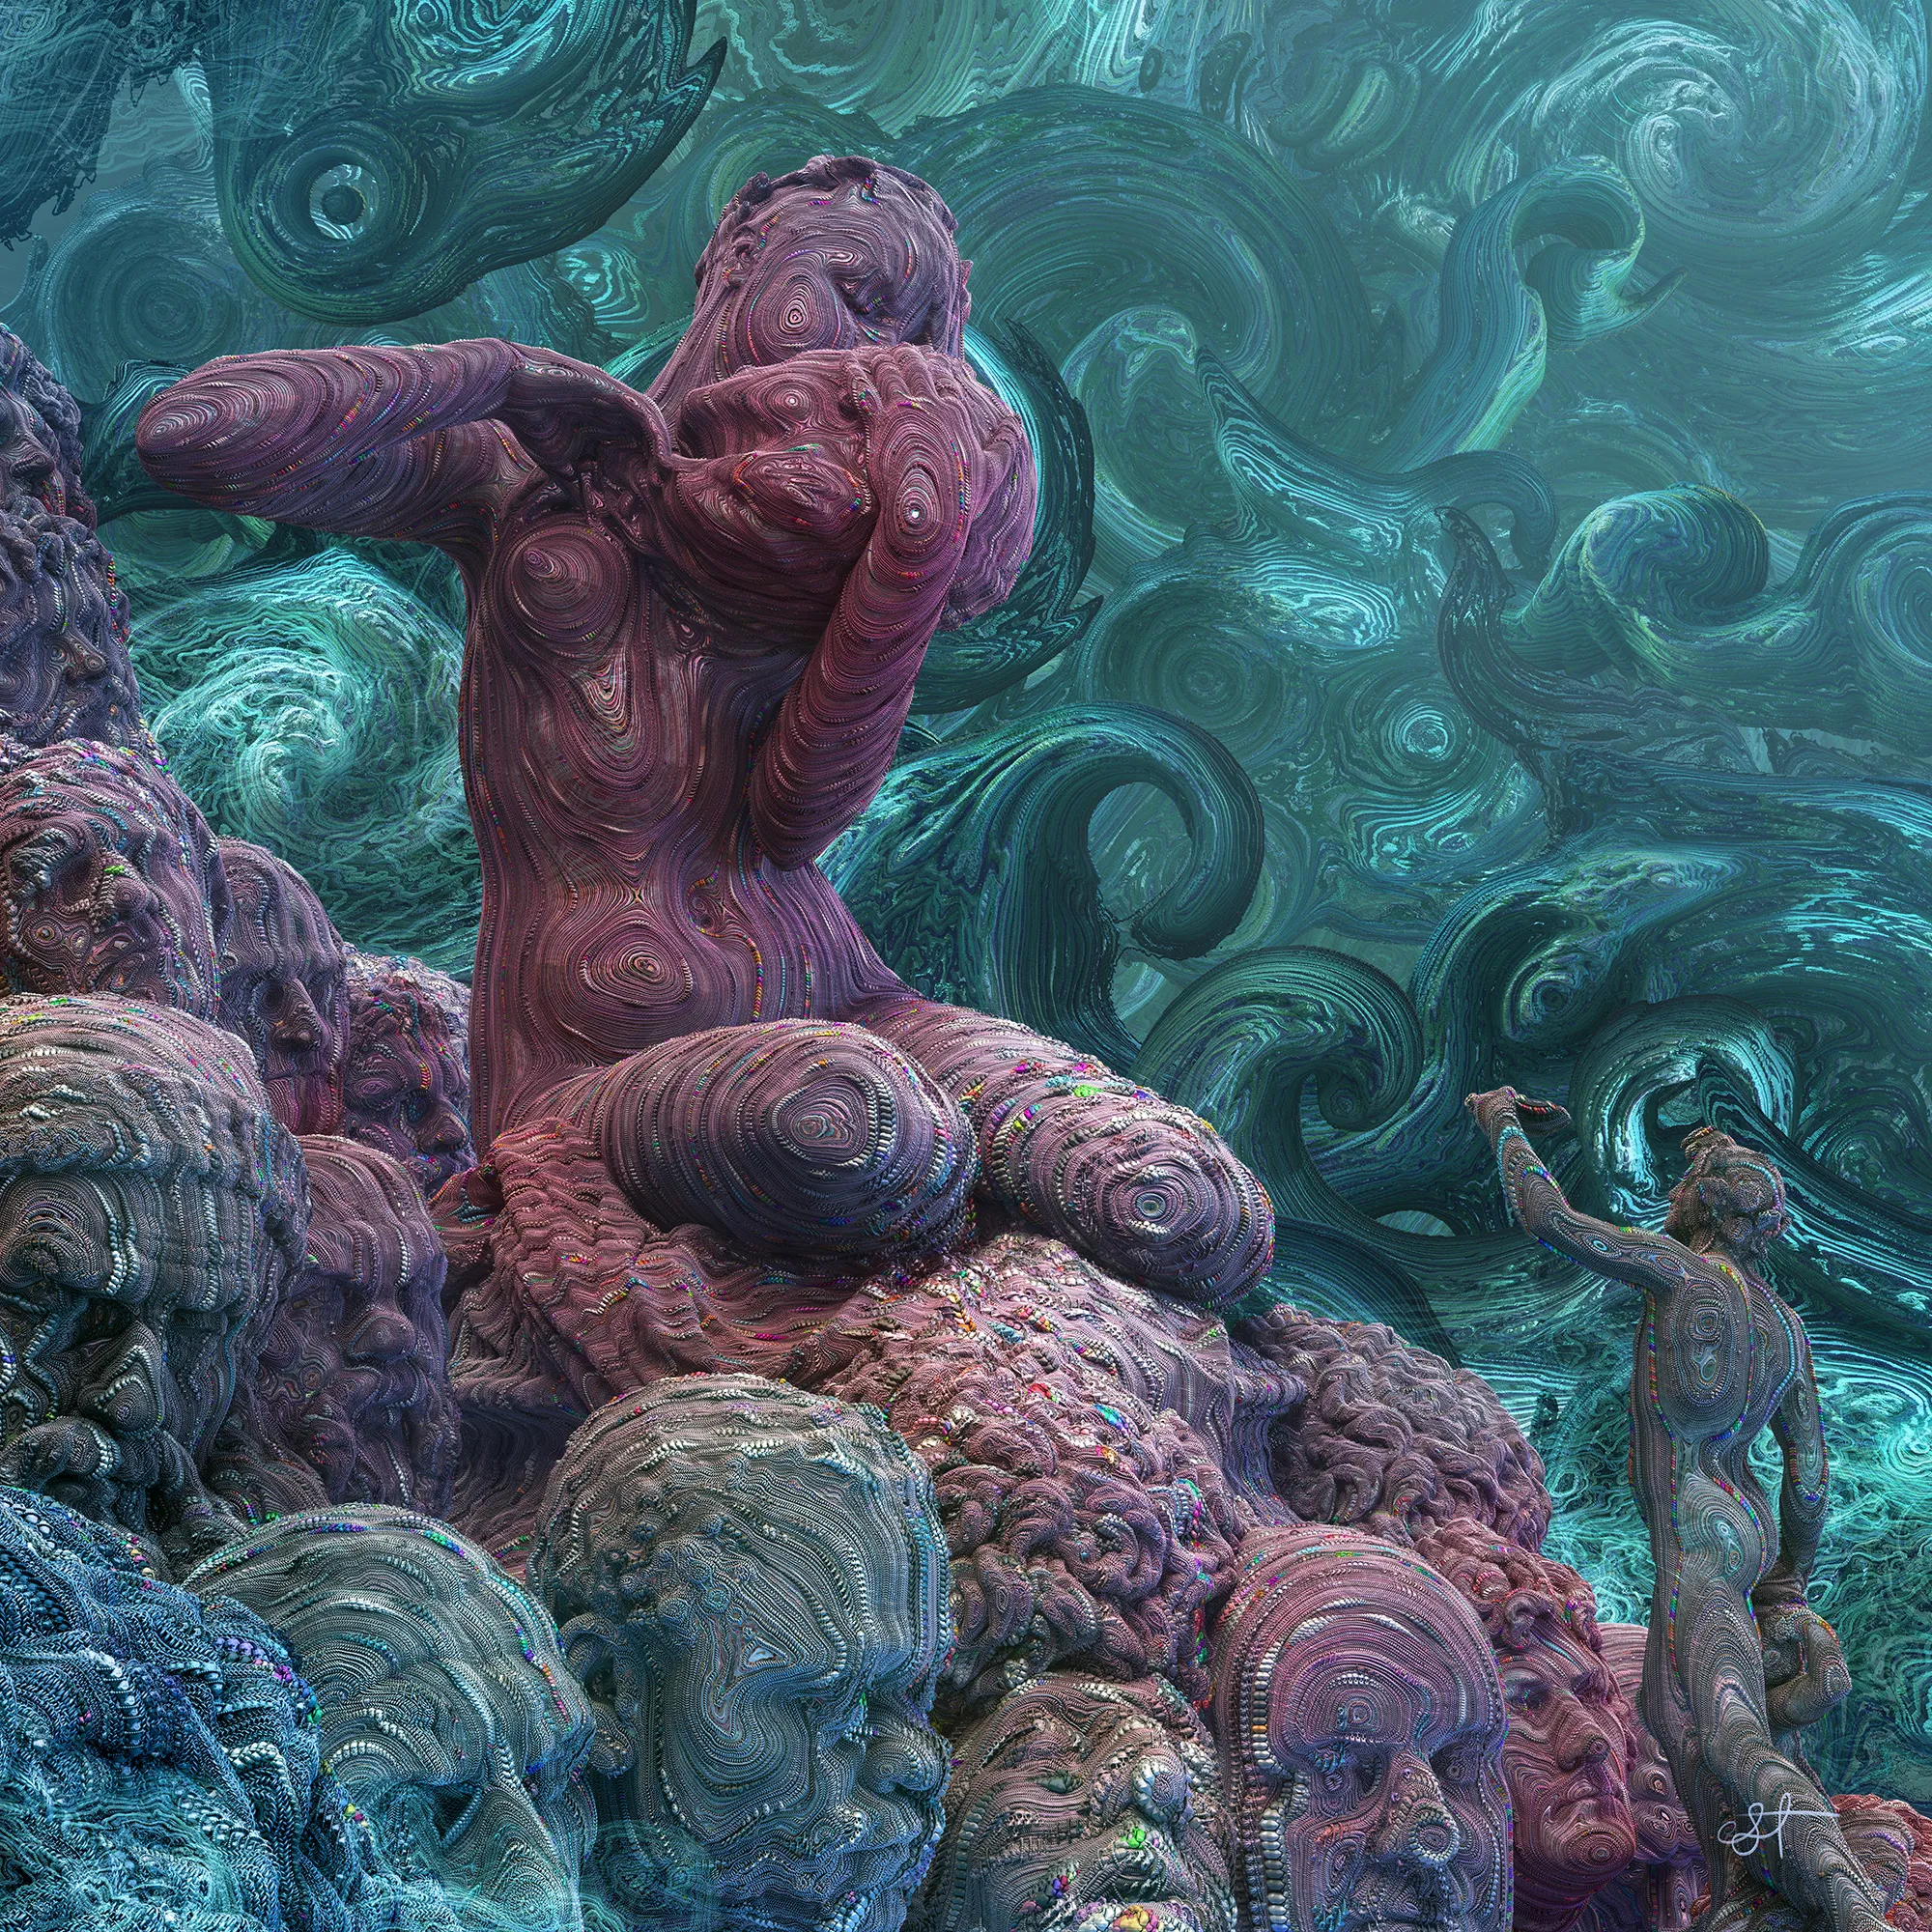 Naked woman in purple tones sit on man's head's. Background in turquoise tones with sea waves.